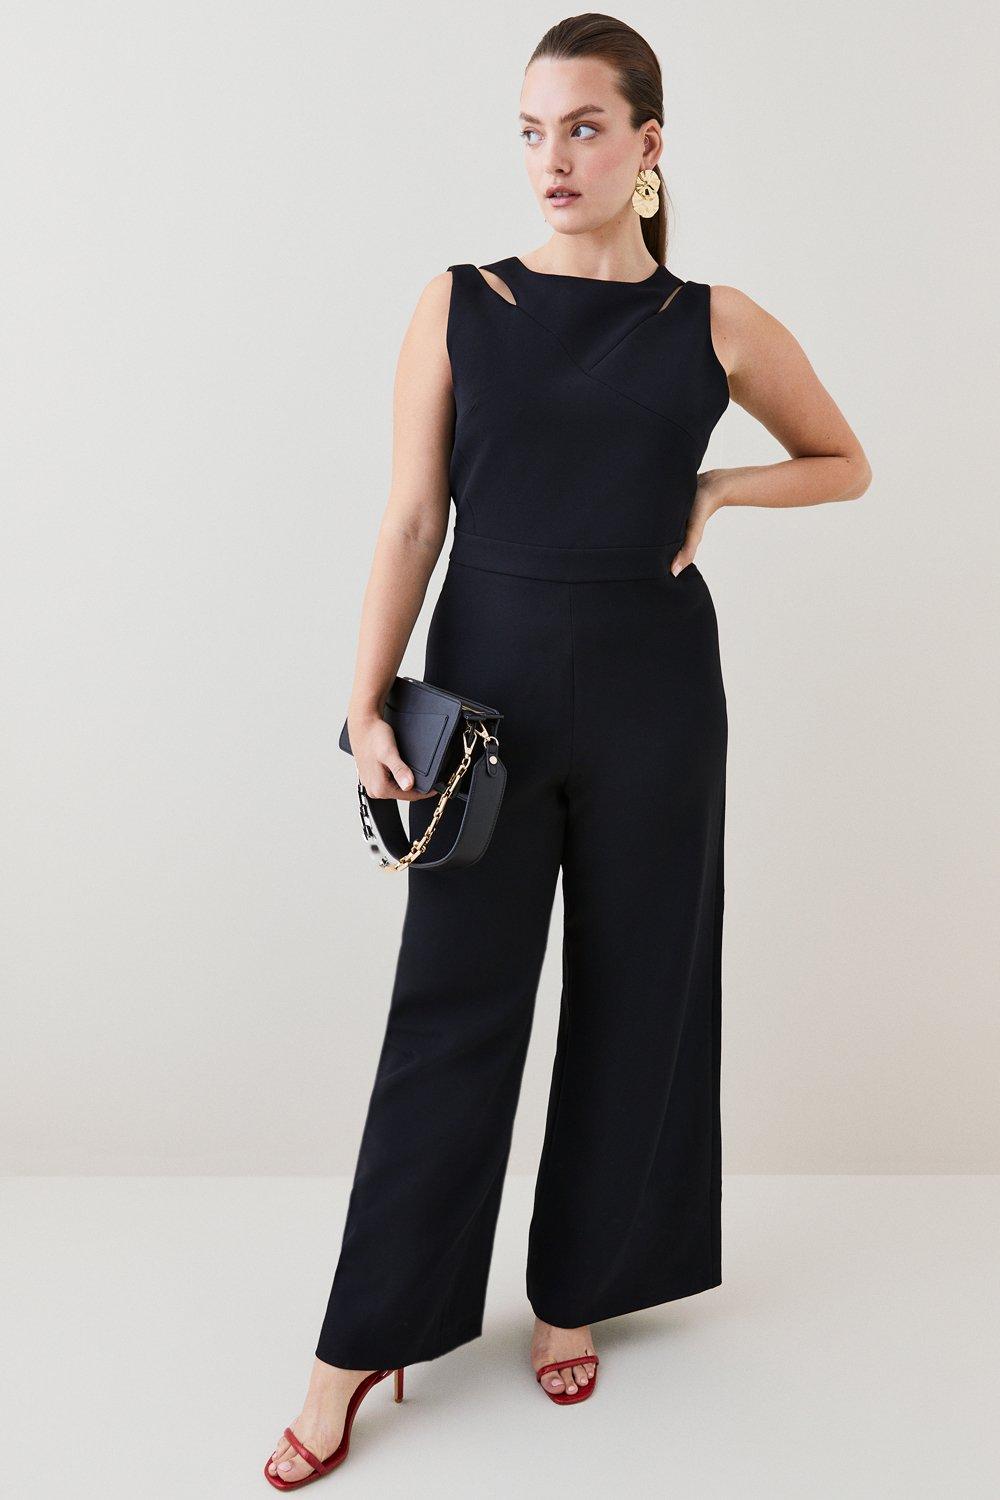 Herinnering lobby Overtuiging Plus Size Structured Crepe Cut Out Jumpsuit | Karen Millen